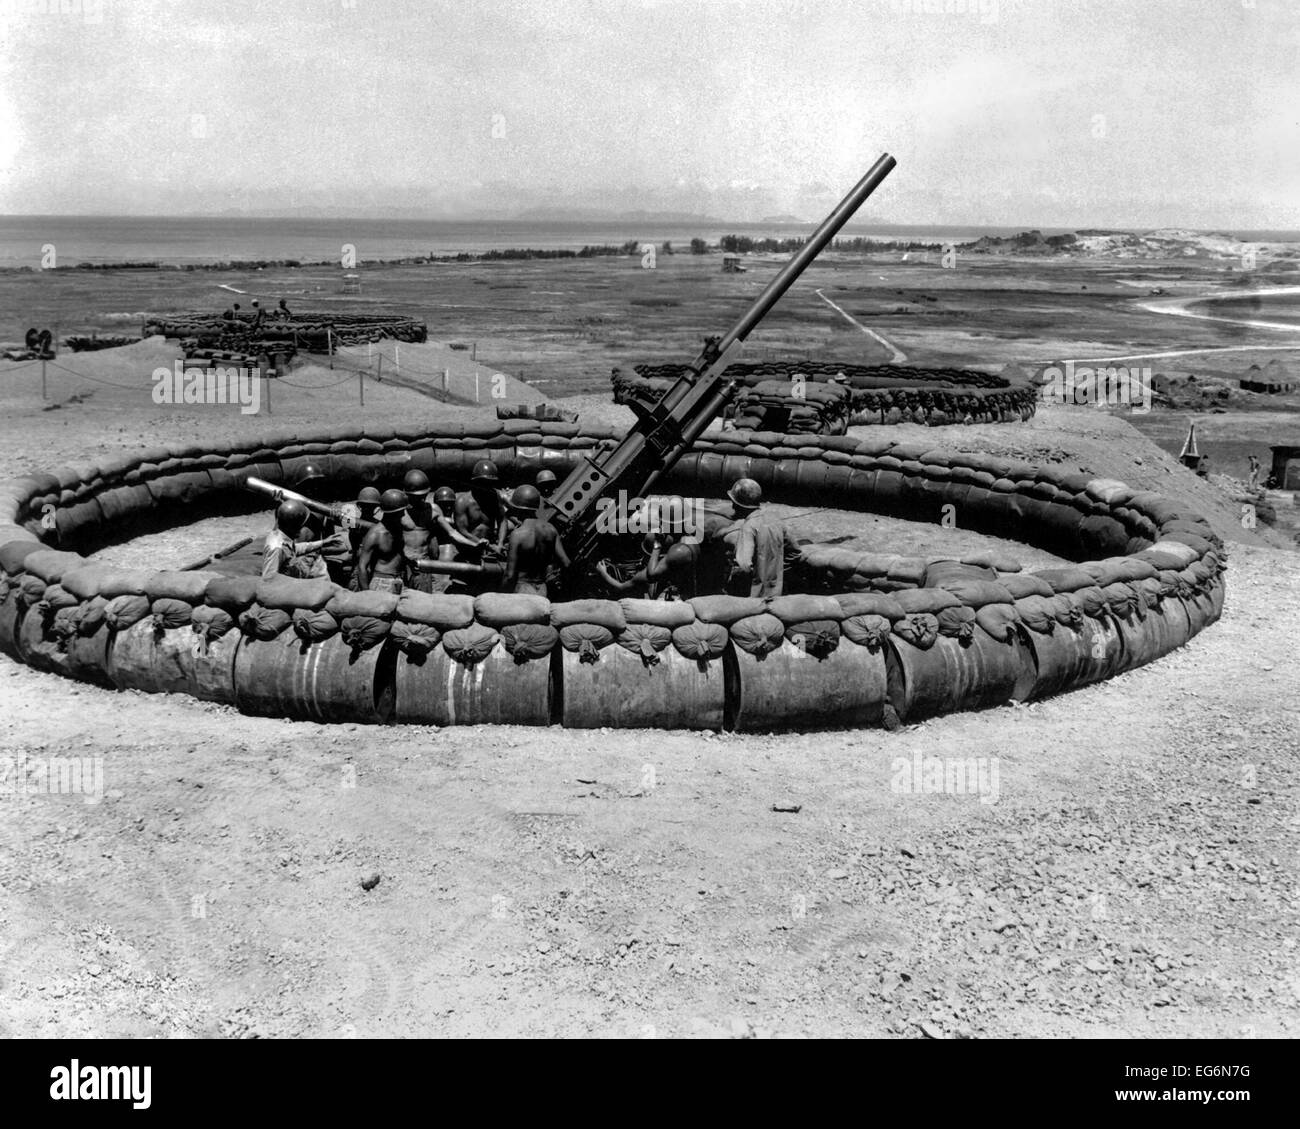 90mm anti-aircraft gun emplacement with crew in pit on Okinawa, July 18, 1945. World War 2. (BSLOC 2014 10 155) Stock Photo